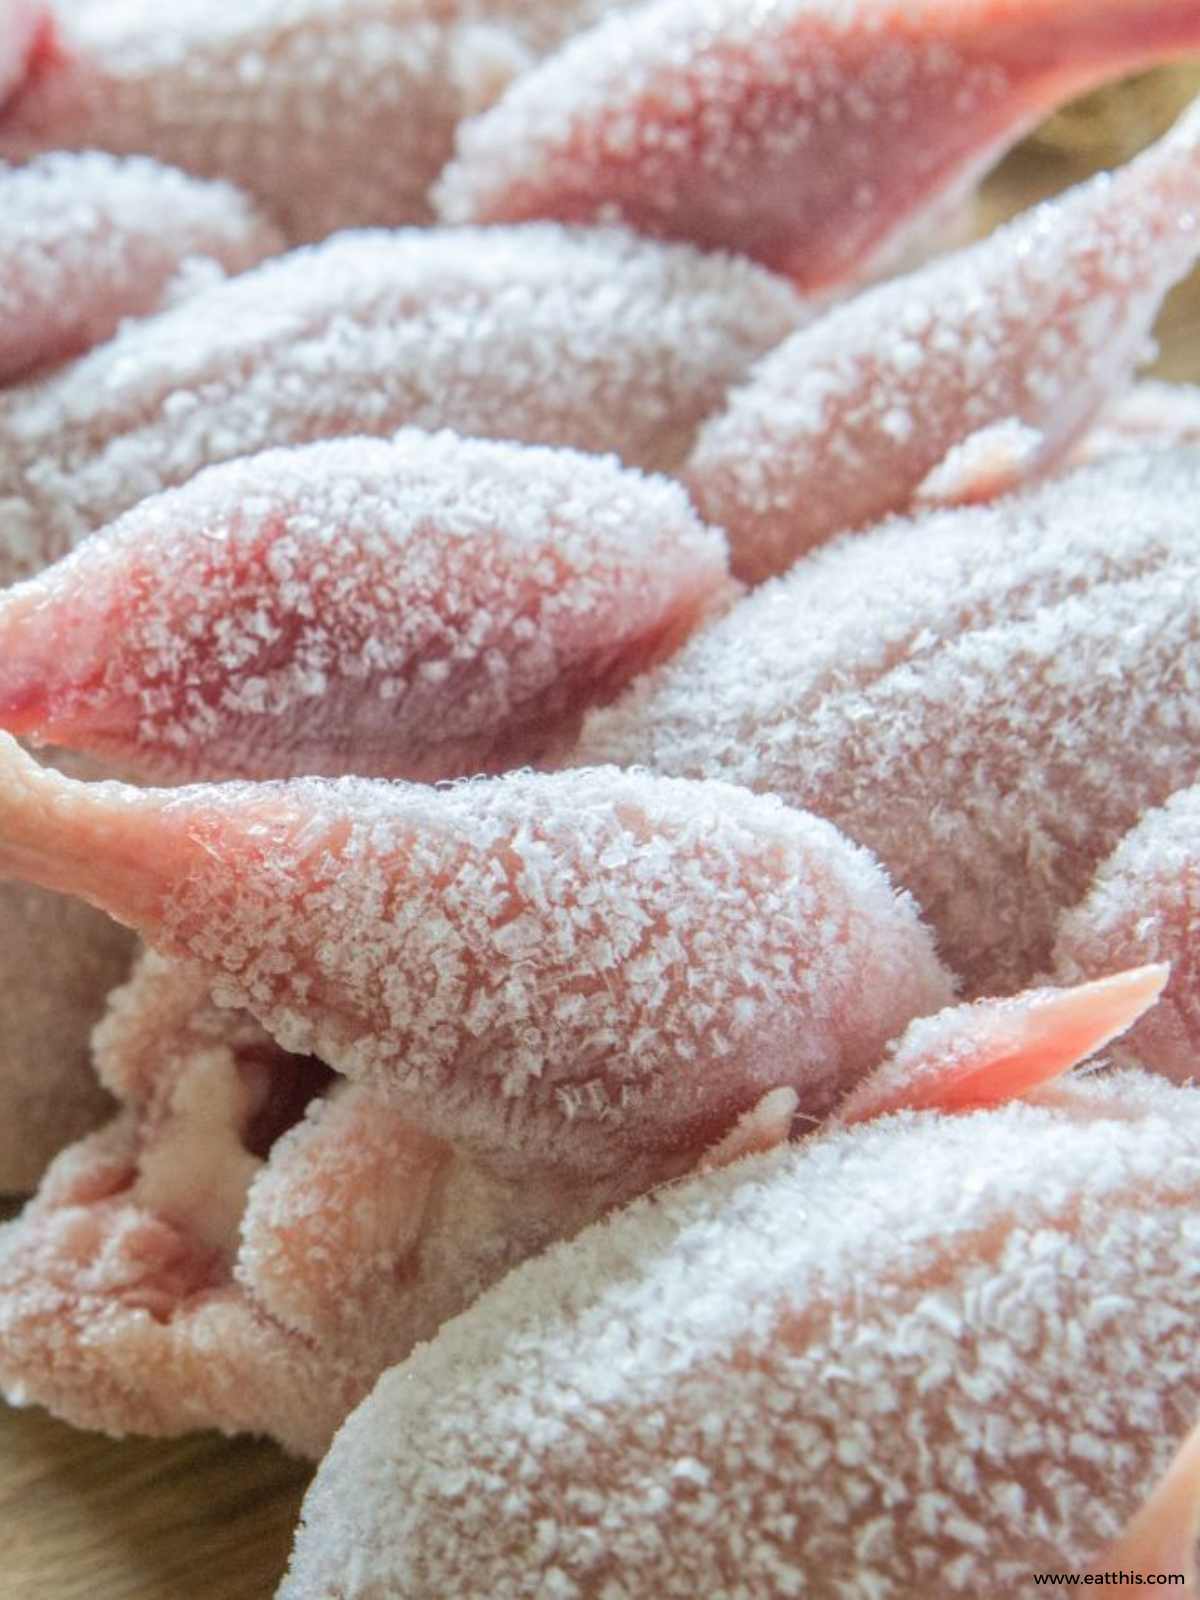 The science behind why and how freezing preserves chicken